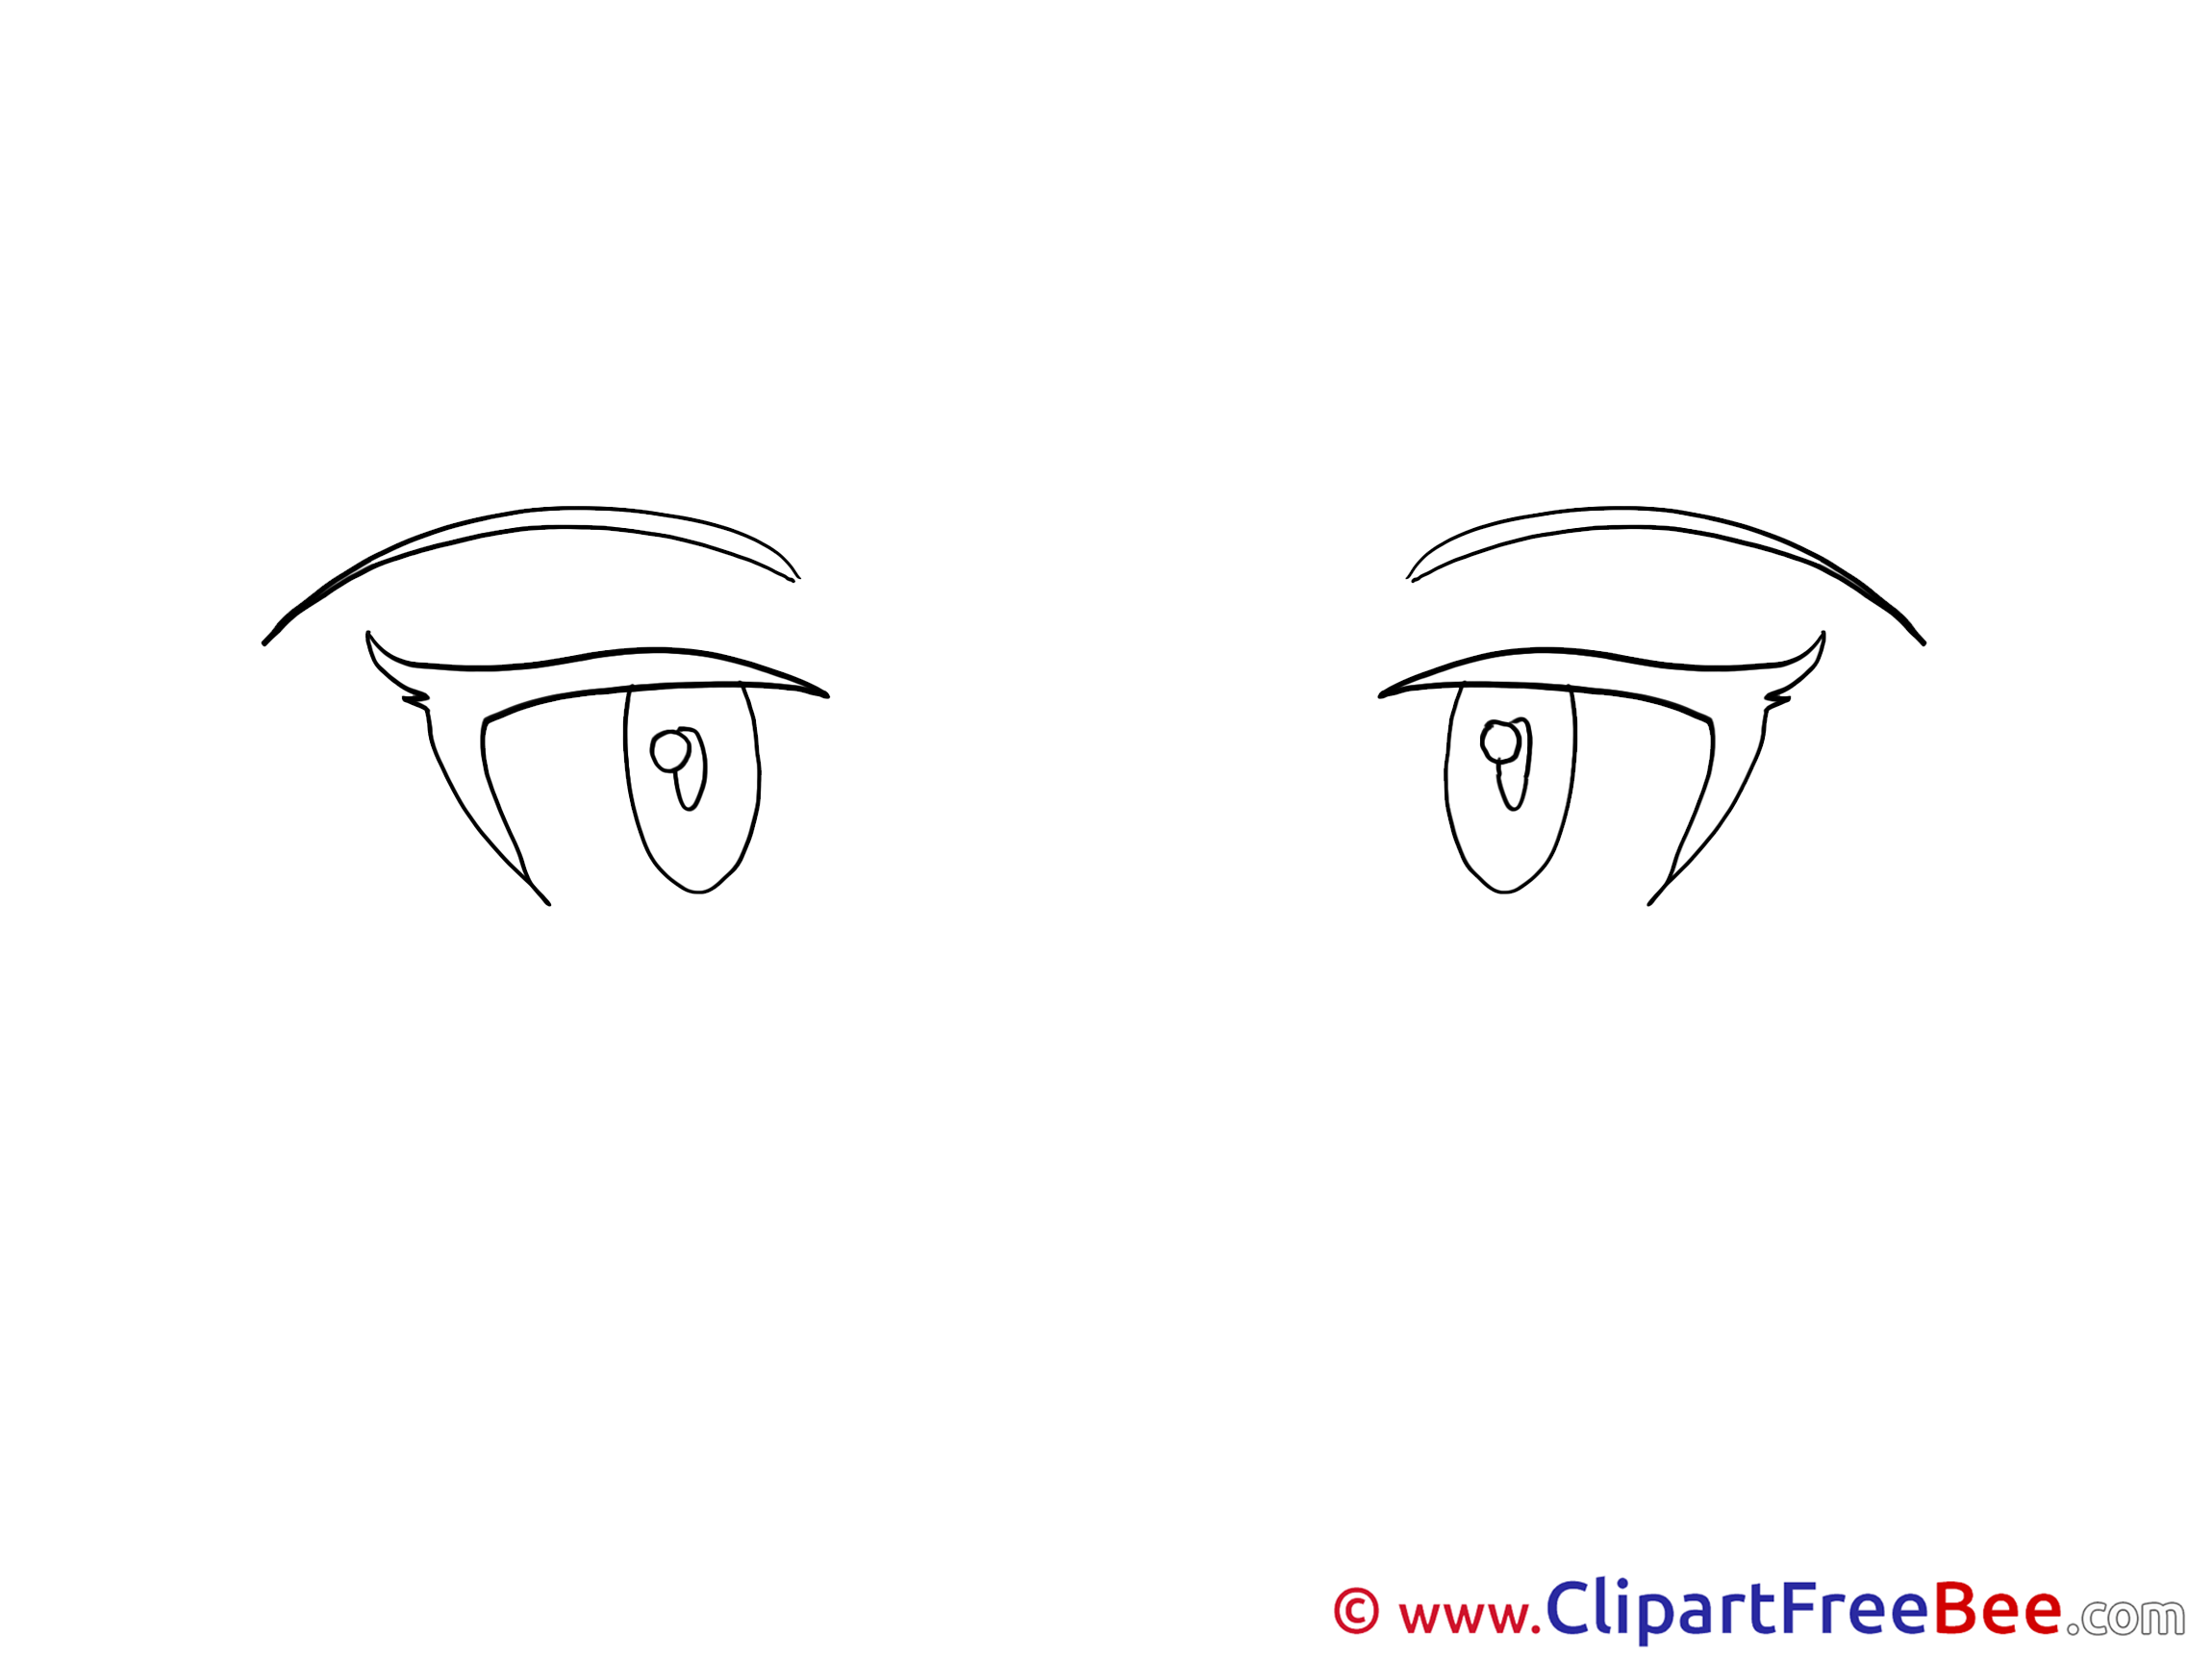 Look Clipart free Image download